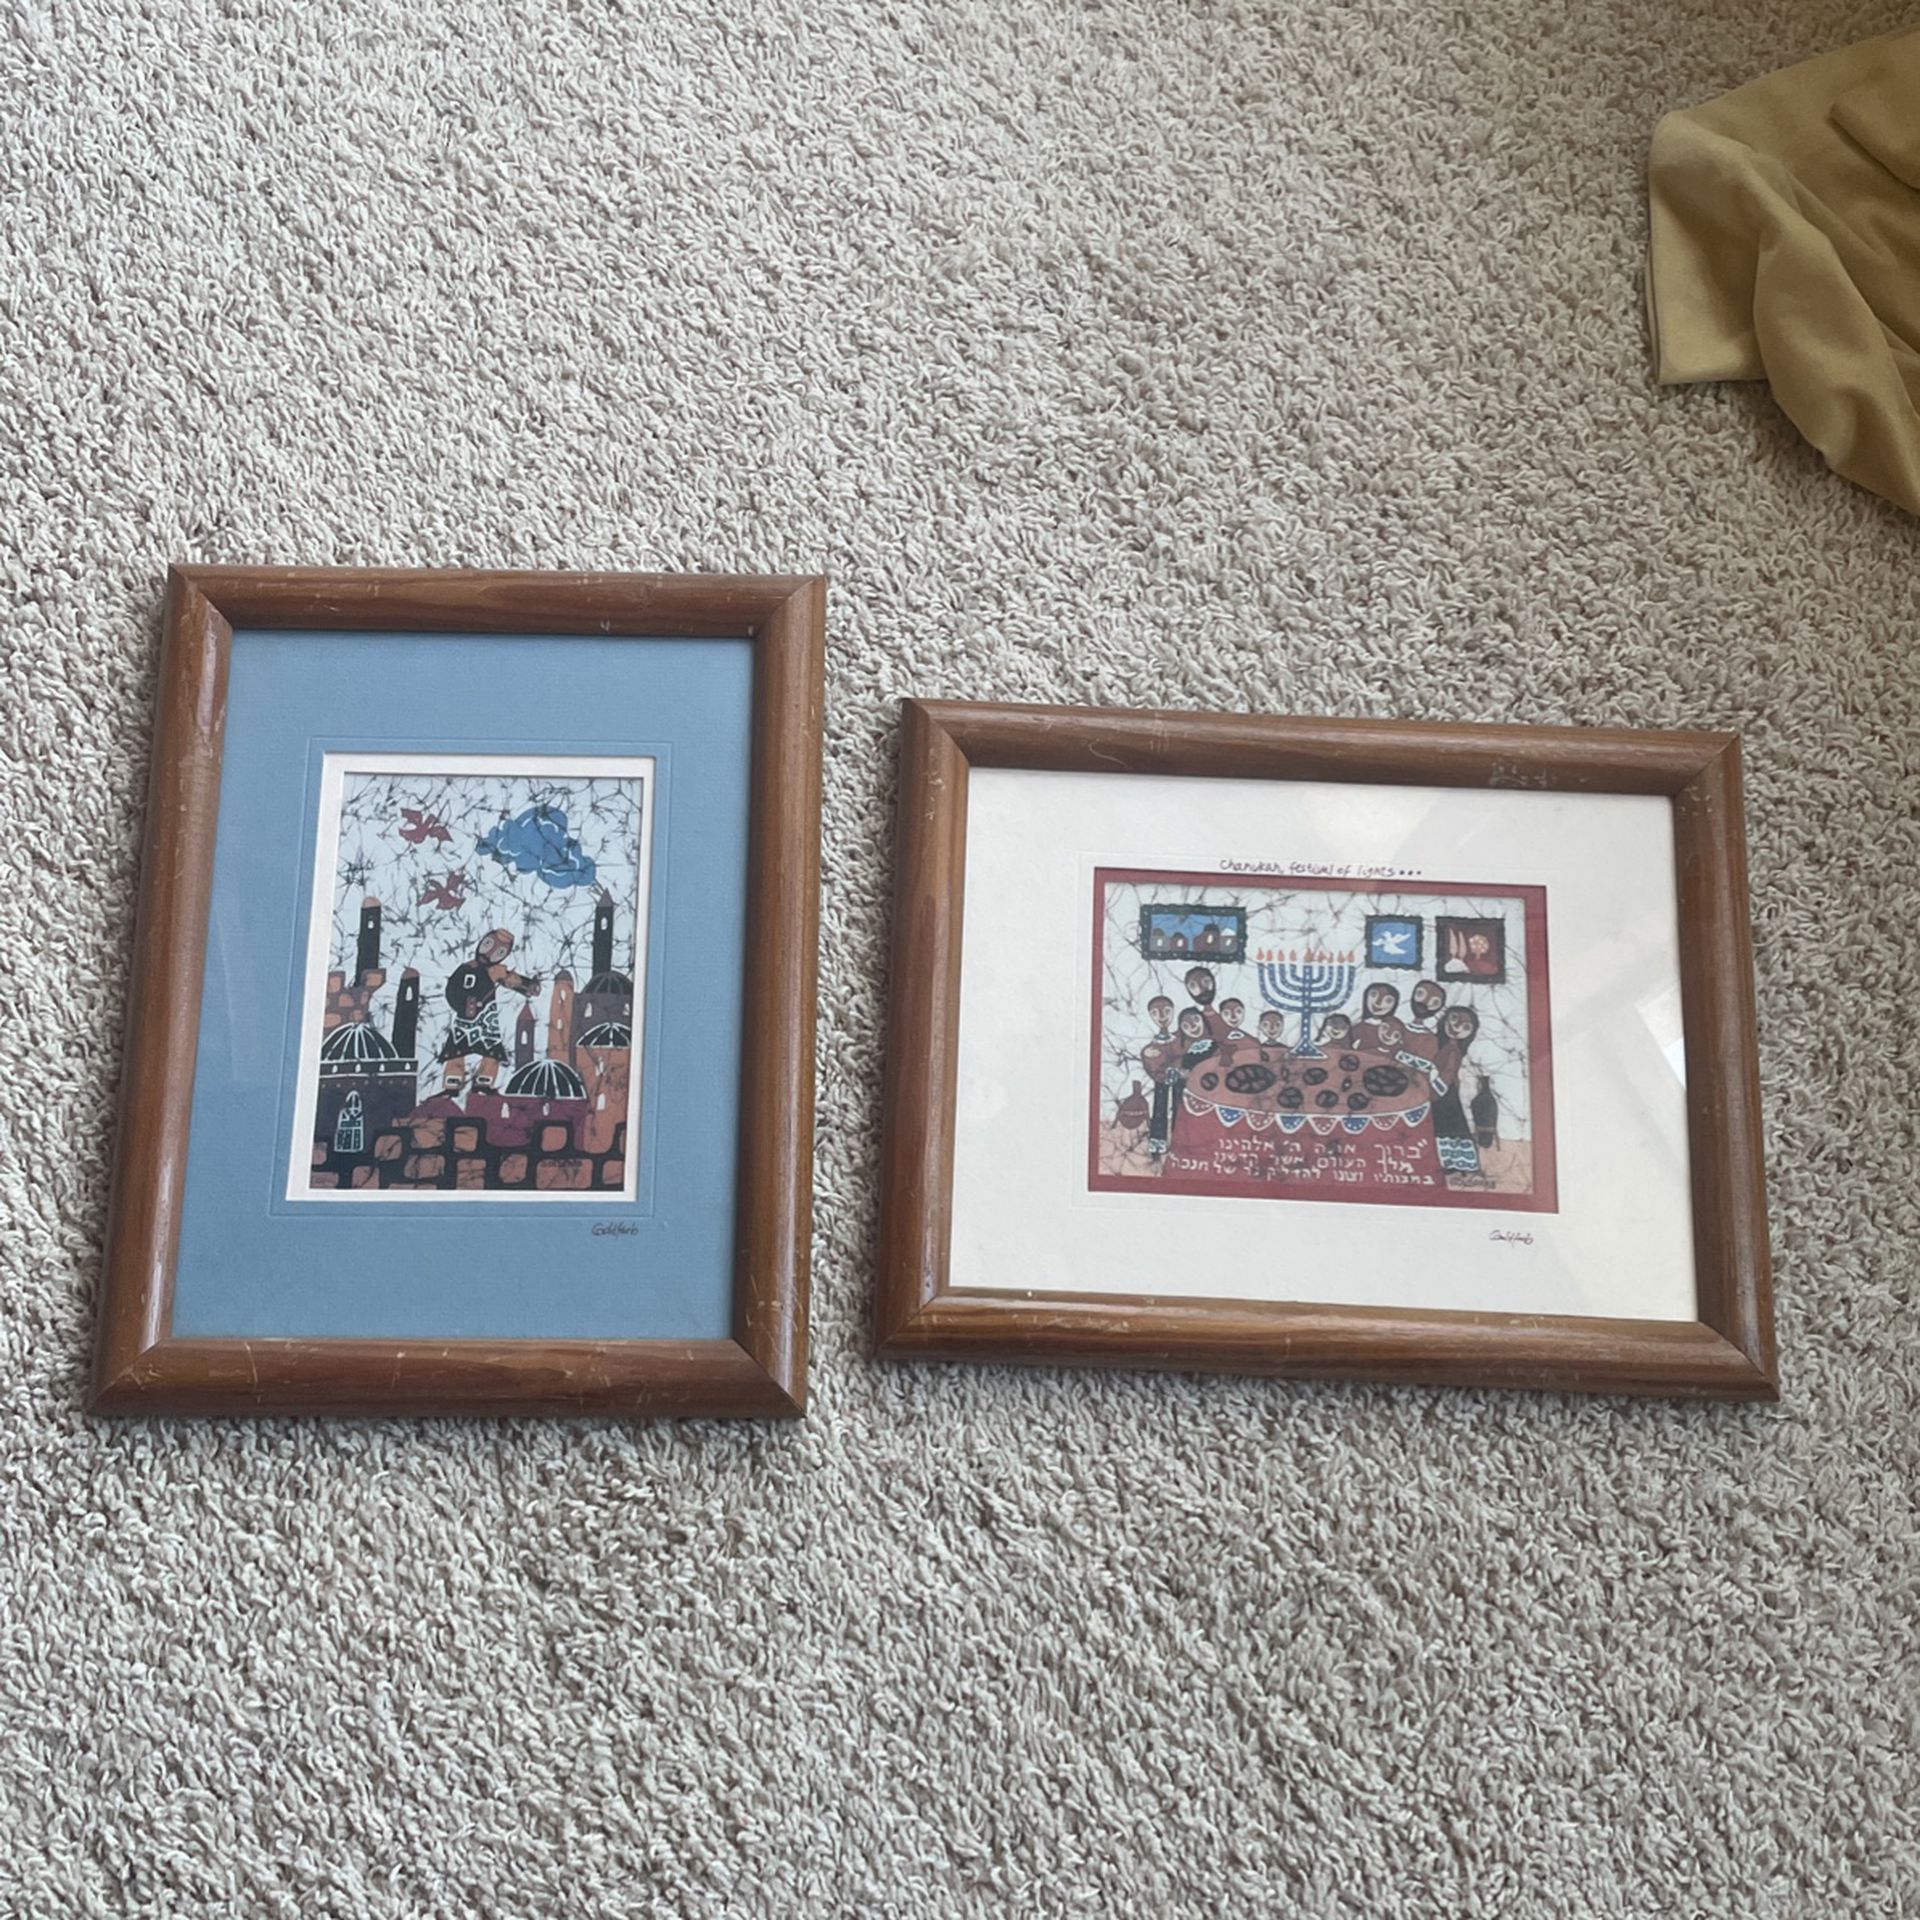 Set Matted Prints Signed By Artist Goldfarb